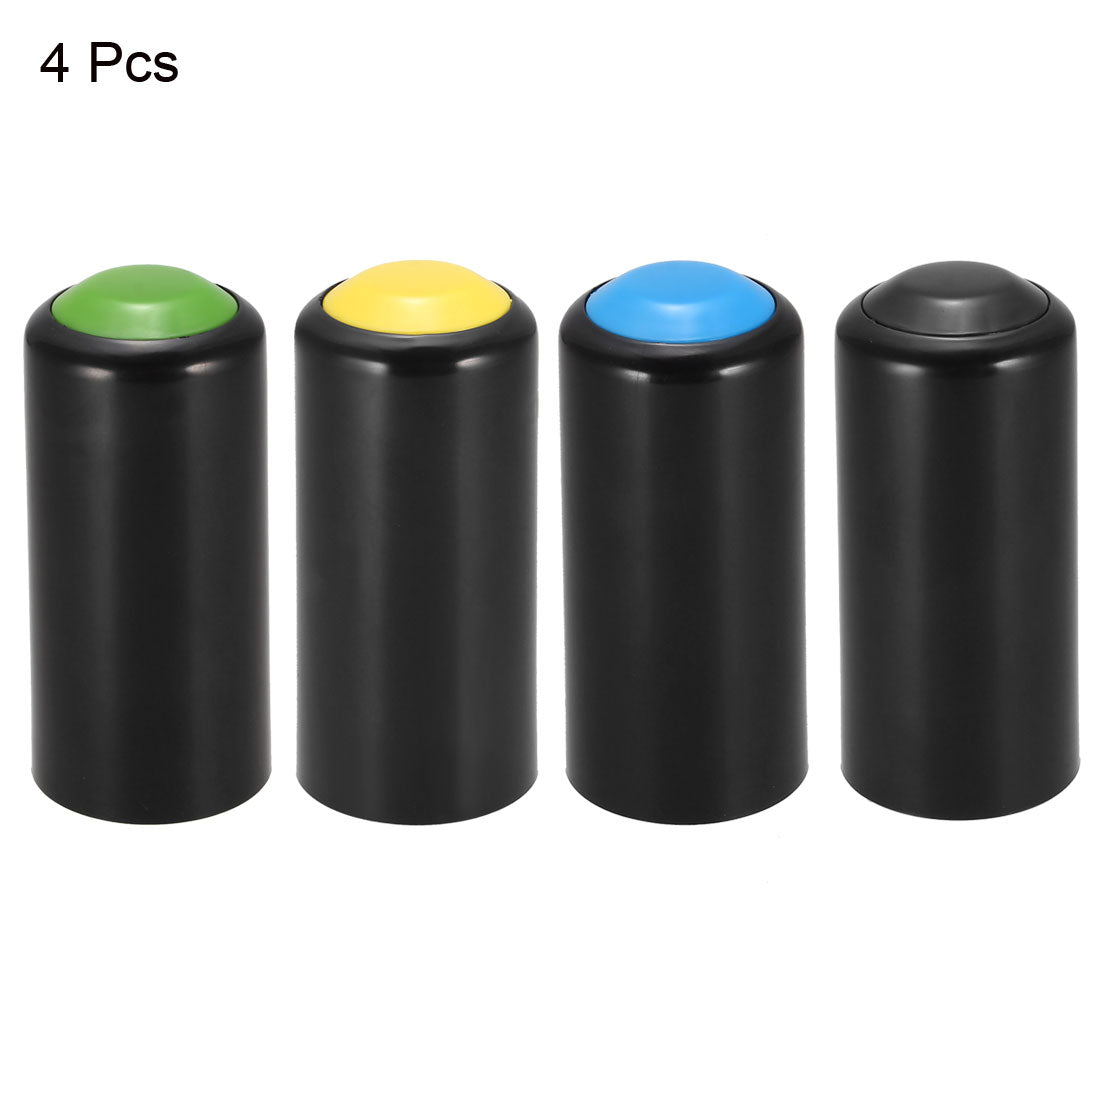 uxcell Uxcell Battery Cover Mic Battery Screw on Cap Cup Cover for PGX24 SLX24 PG58 SM58 BETA58 Wireless 4 Color 4Pcs